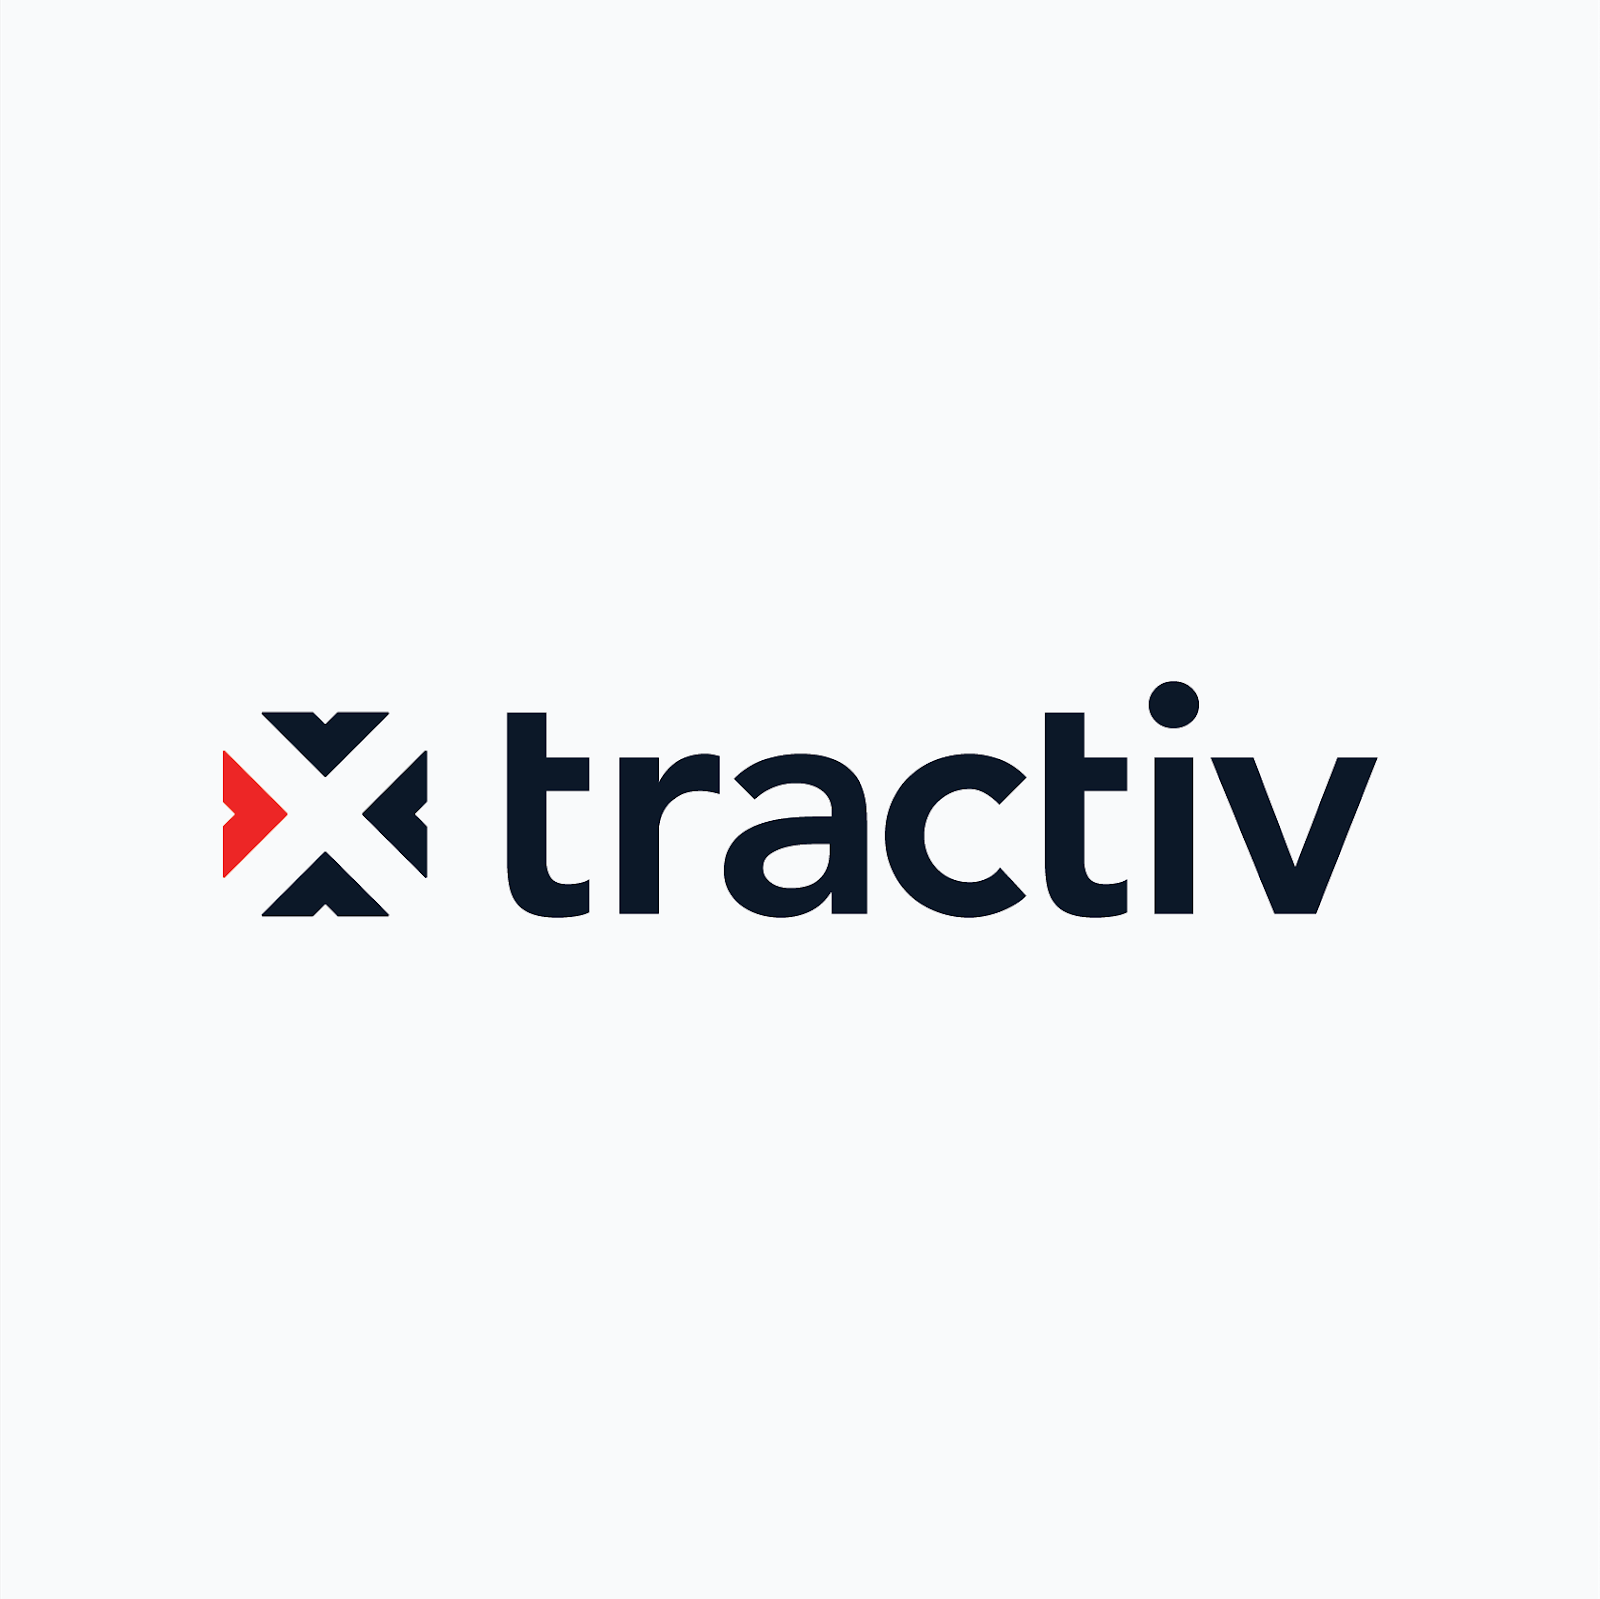 Tractiv, Thursday, July 7, 2022, Press release picture